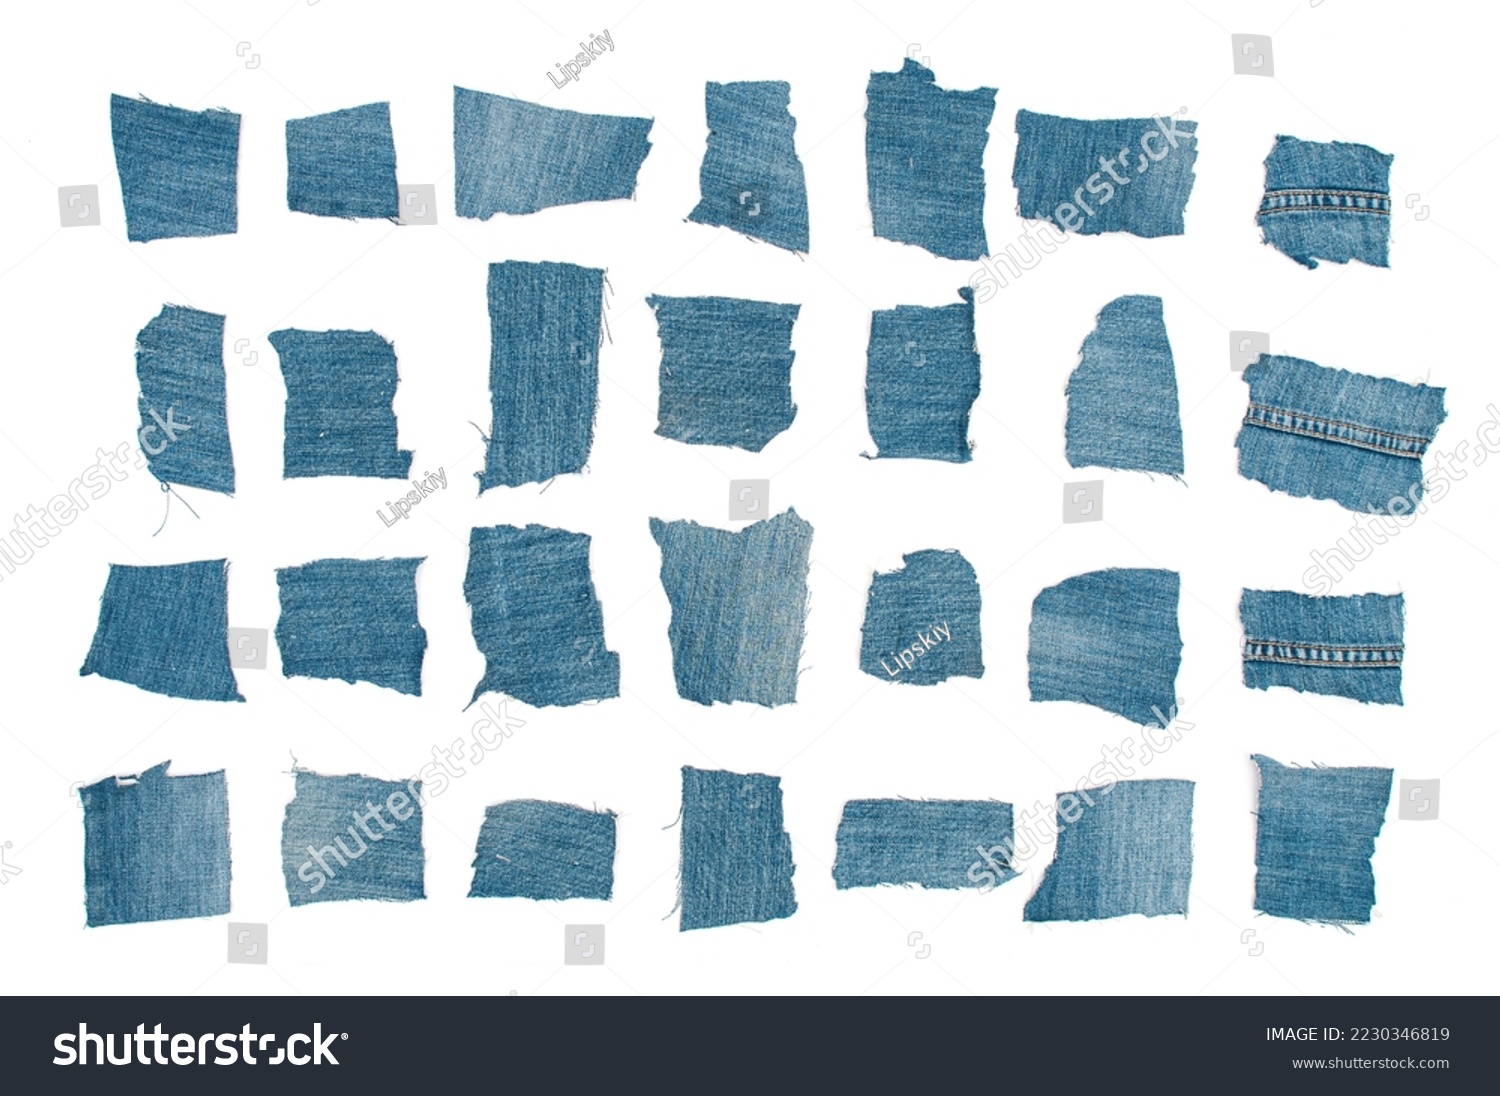 Rows of  grunge denim patches on white background #2230346819